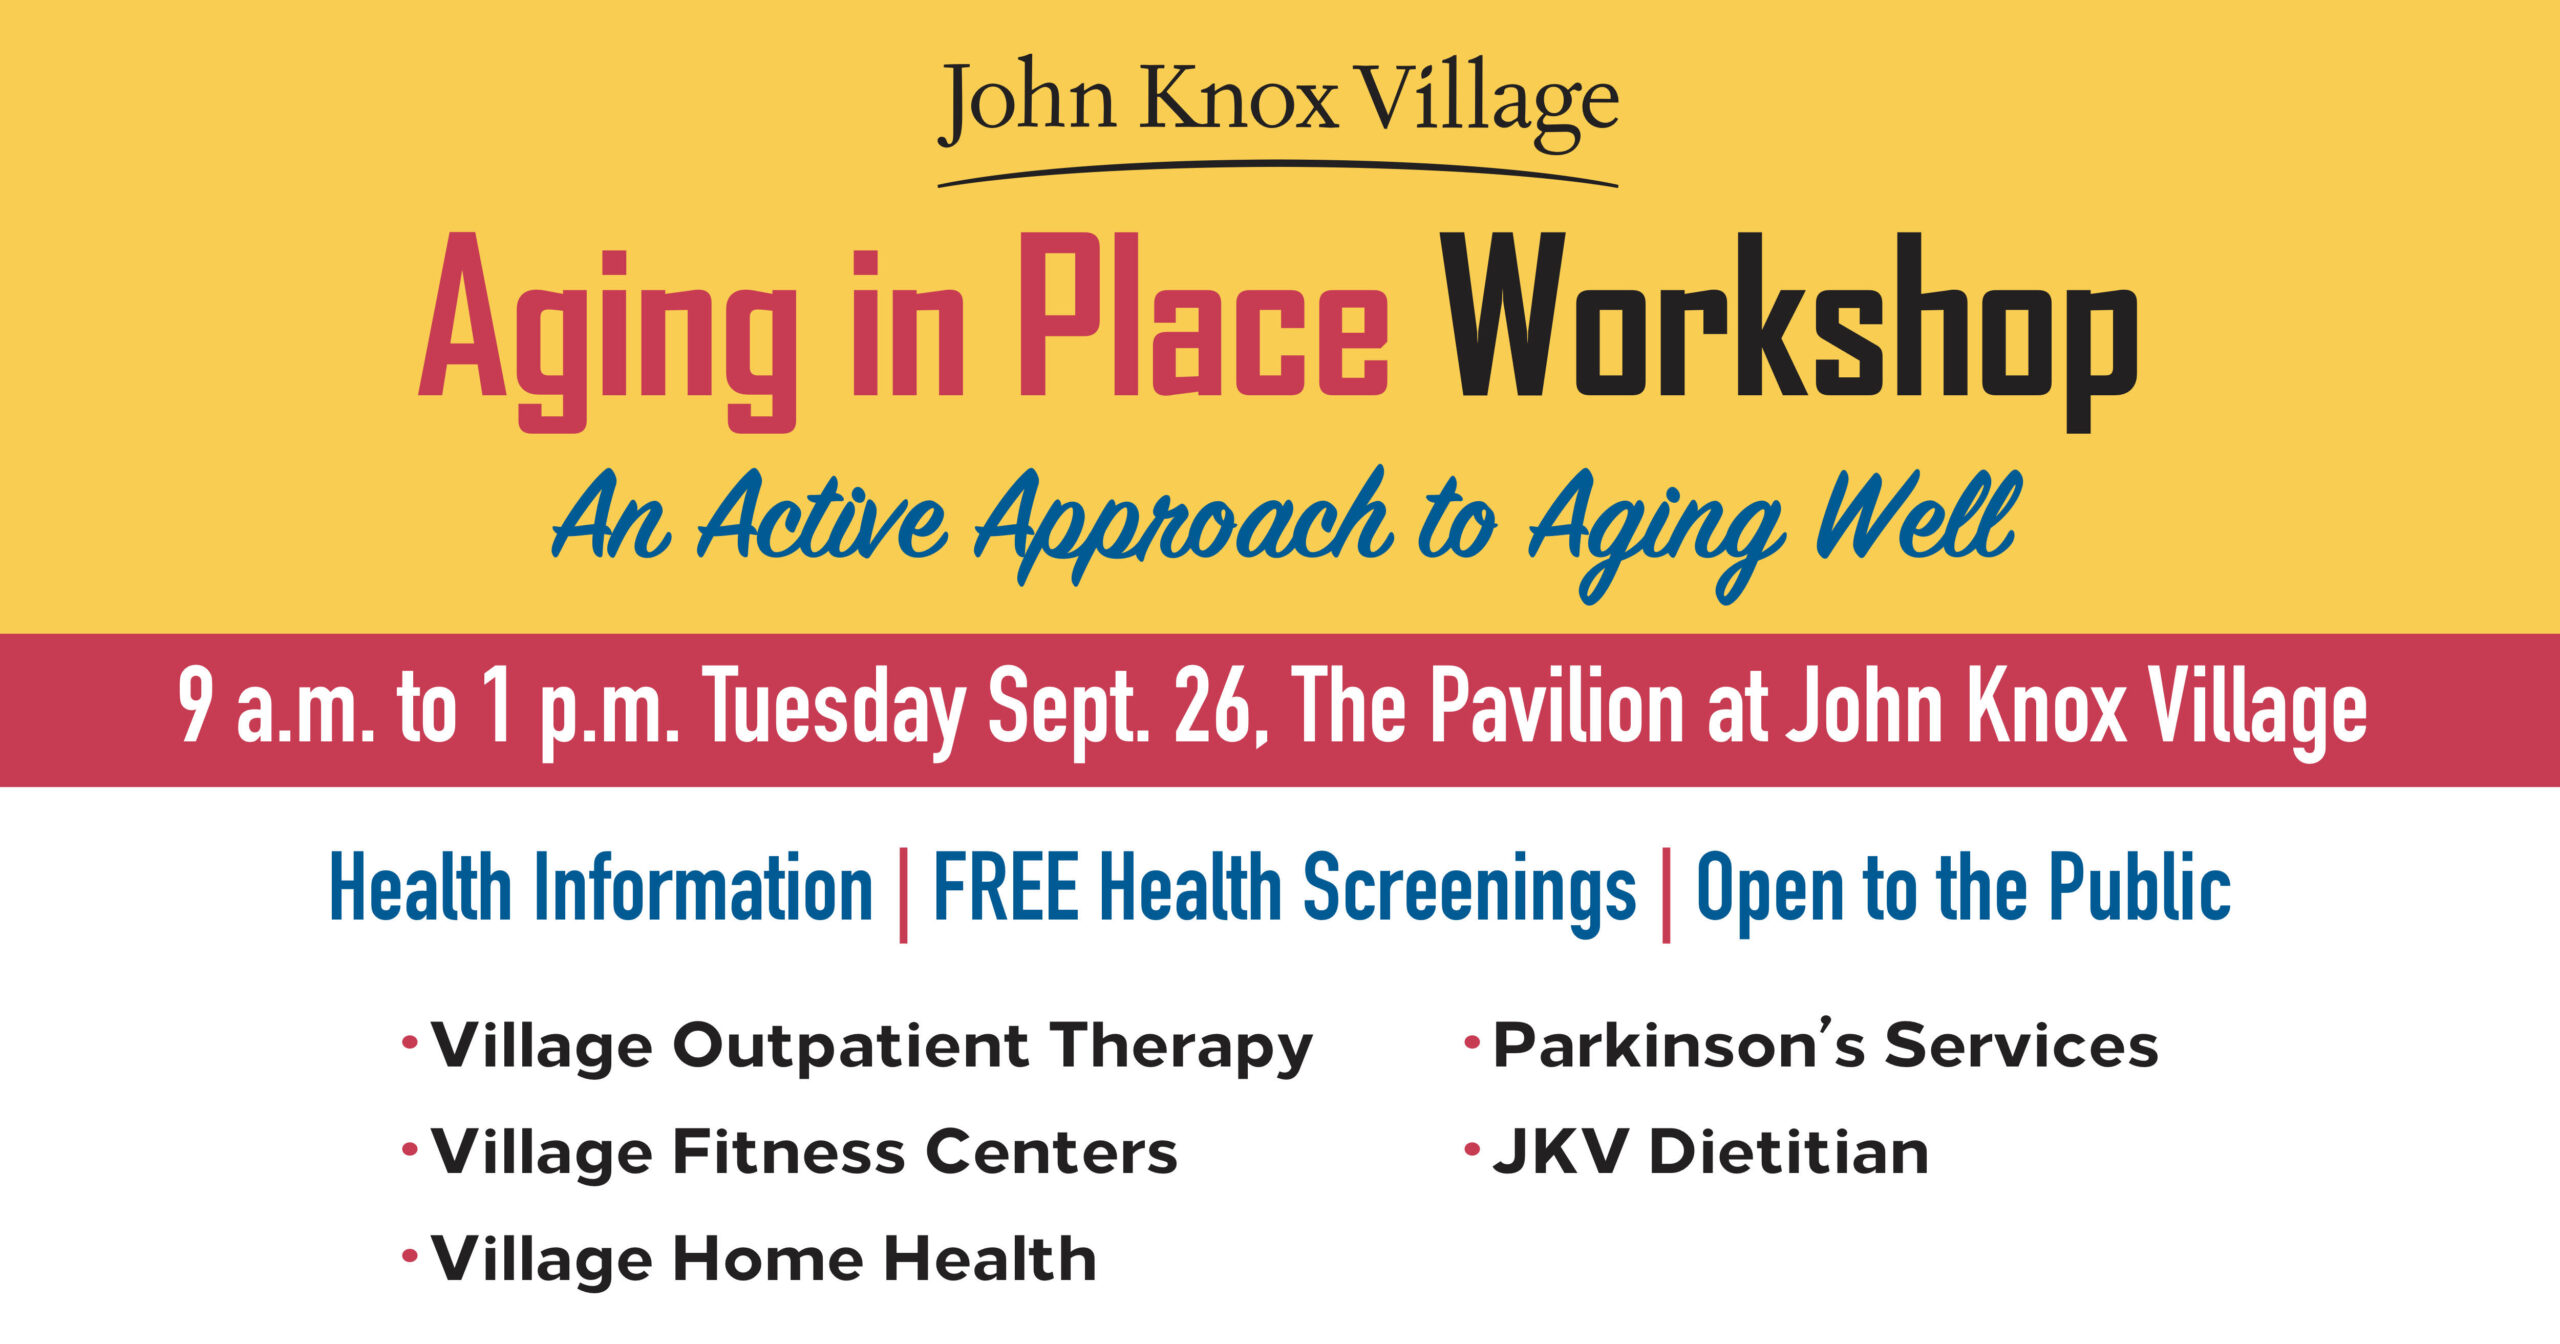 Aging in Place Workshop Graphic - Health Information, Free Health Screenings, Open to the Public